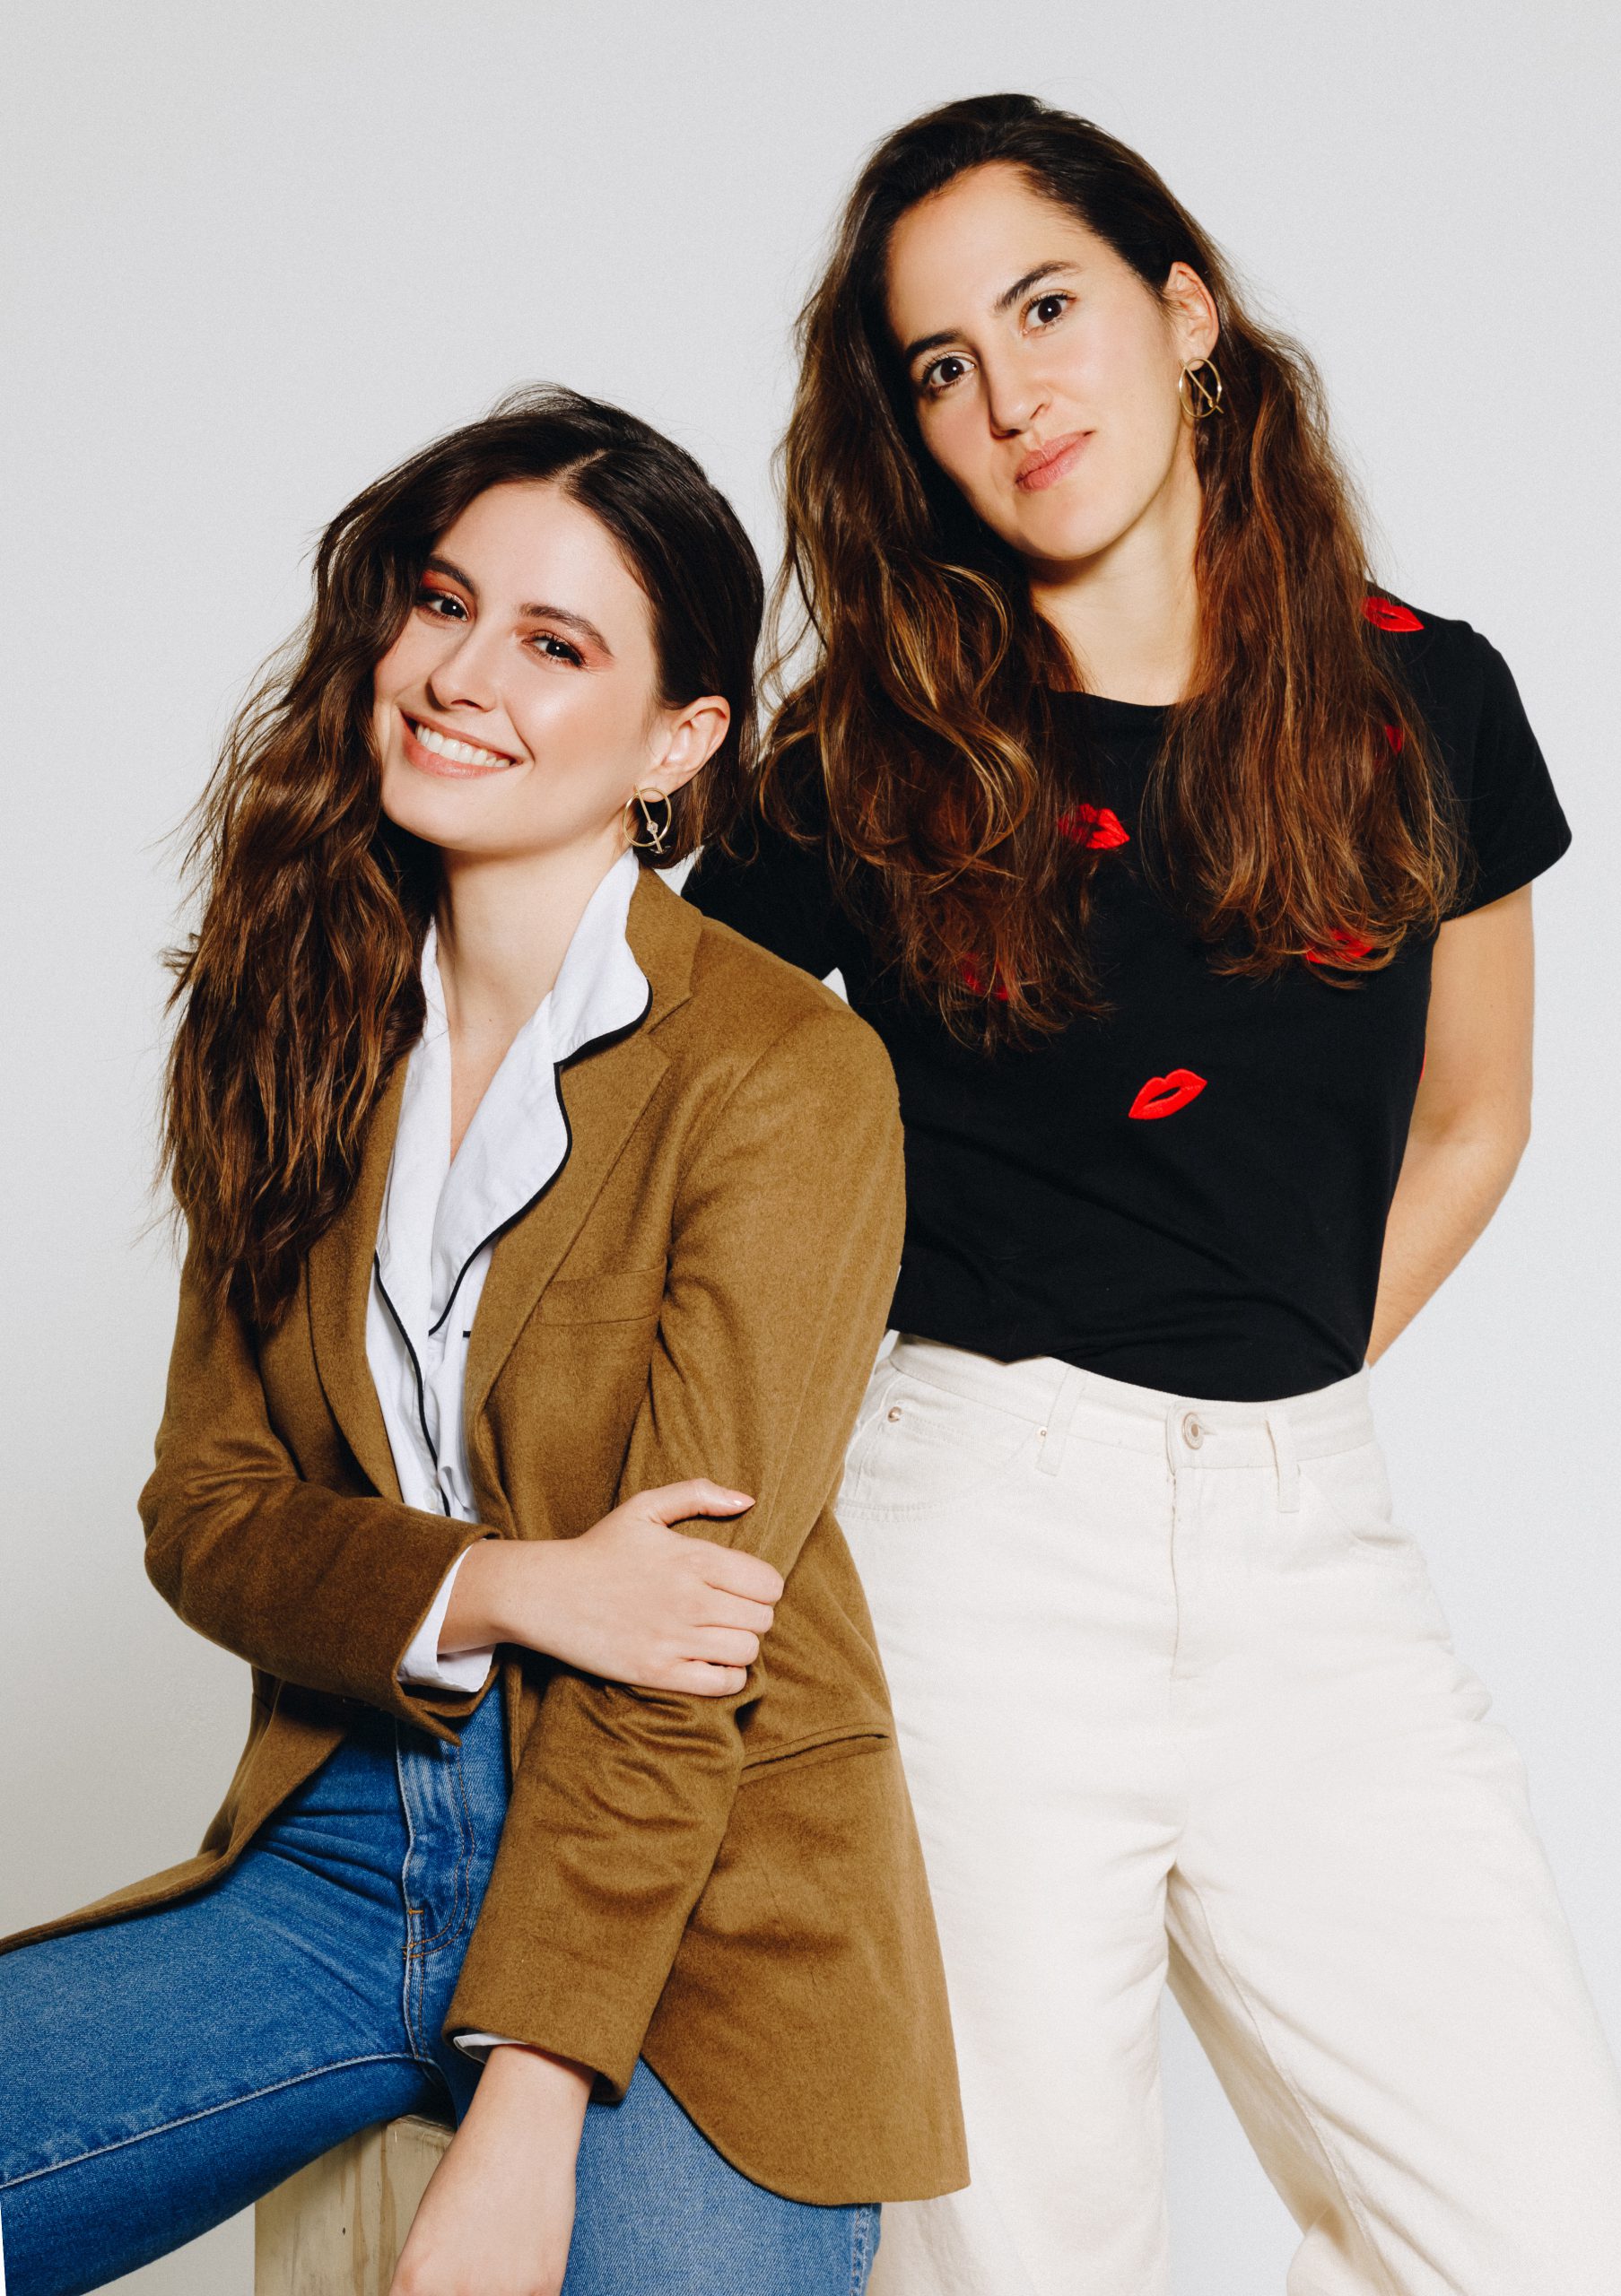 A Friendship Based On Giving Back – Colombian Star Taliana Vargas and Designer Pili Restrepo